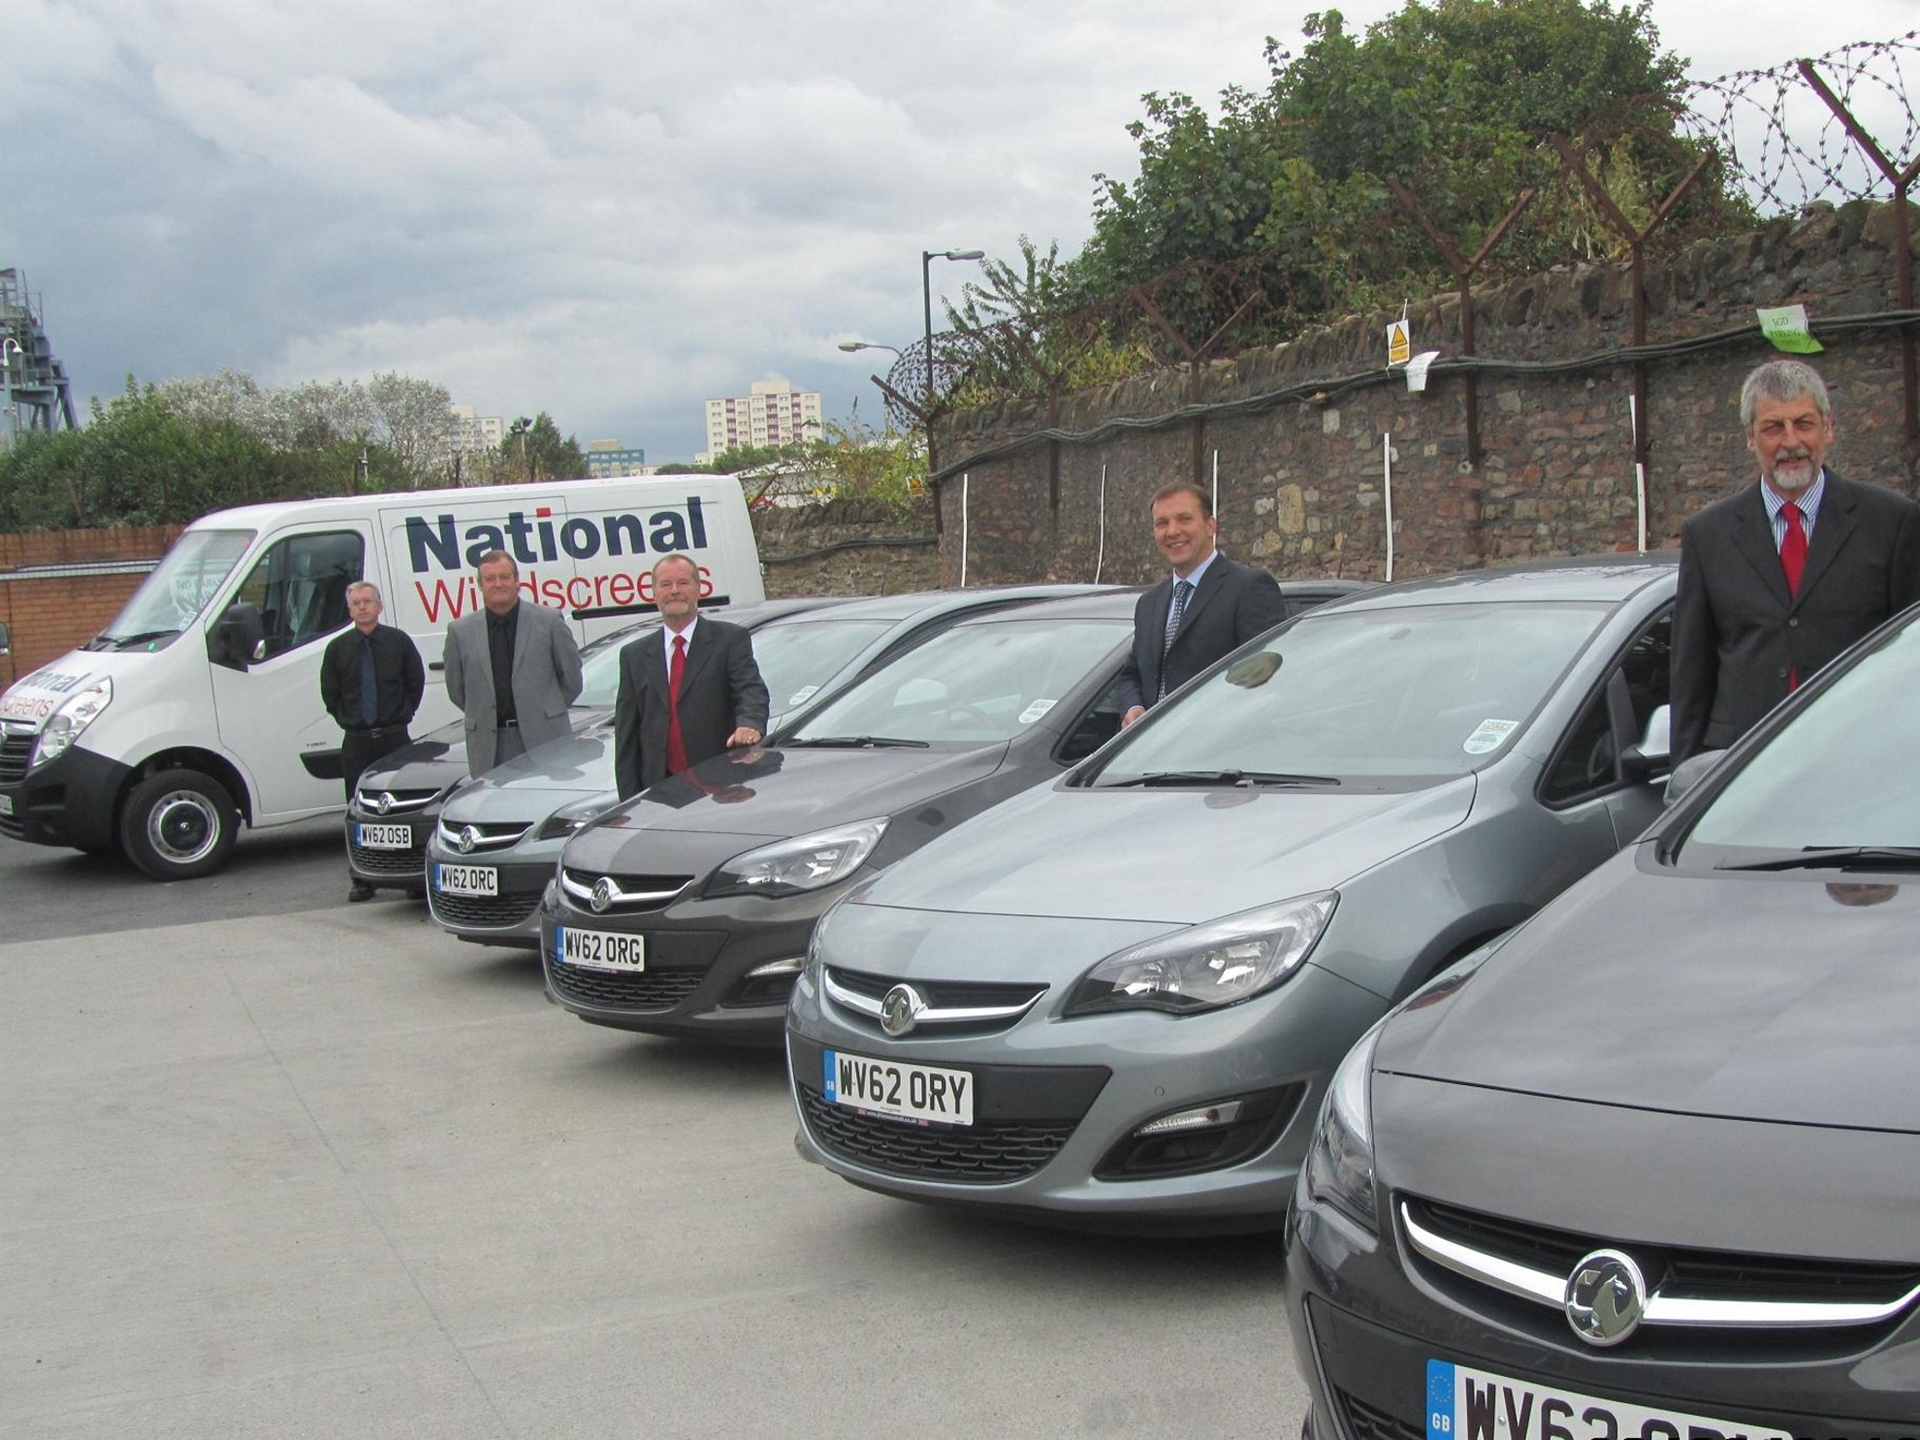 VAUXHALL ASTRA THE CLEAR FLEET SOLUTION FOR NATIONAL WINDSCREENS